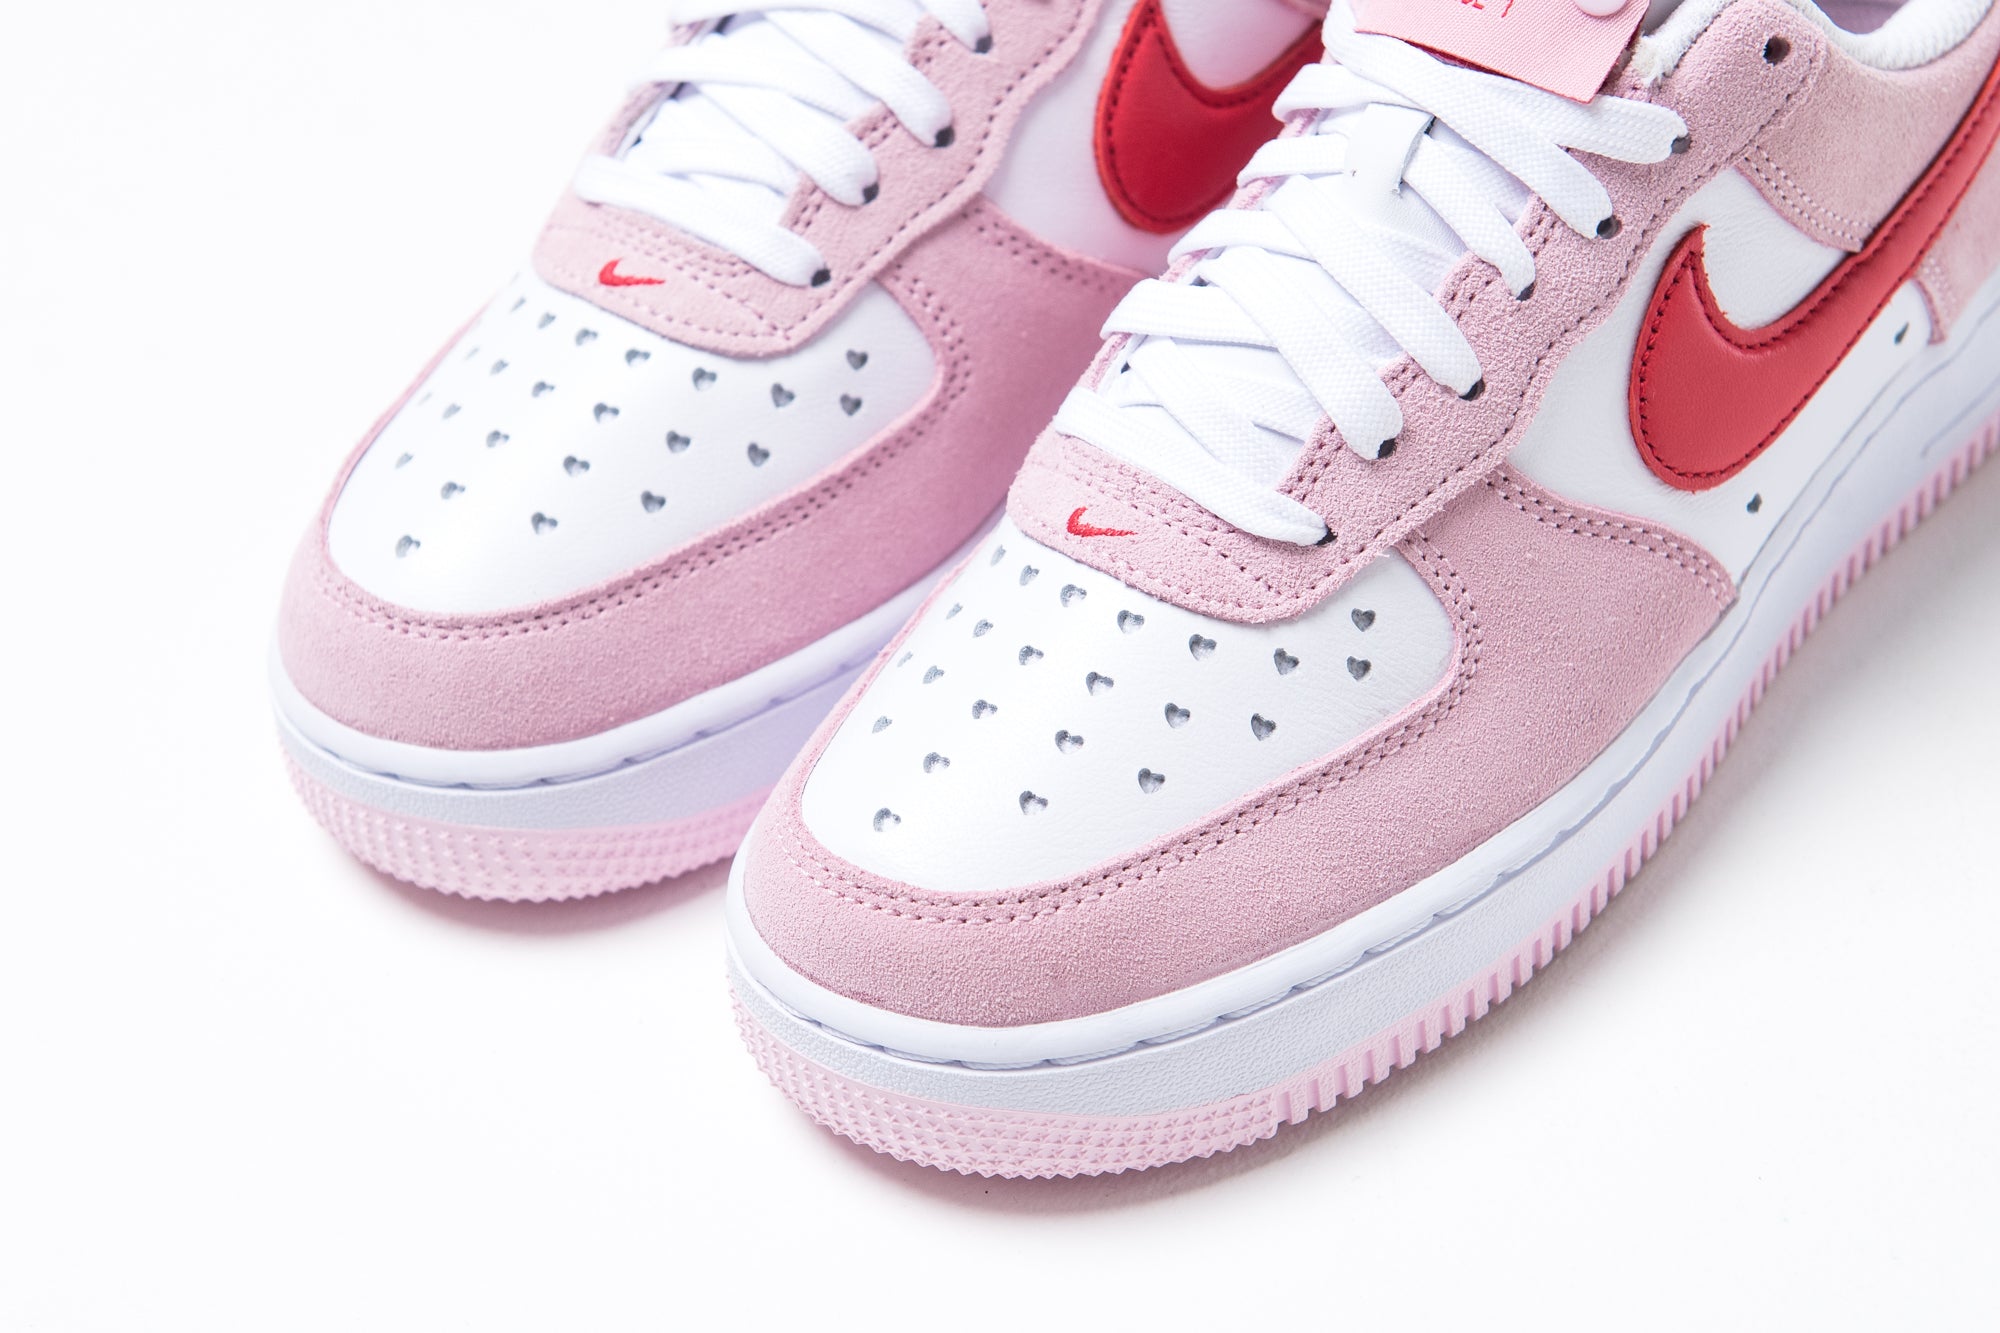 air force 1 valentine's day